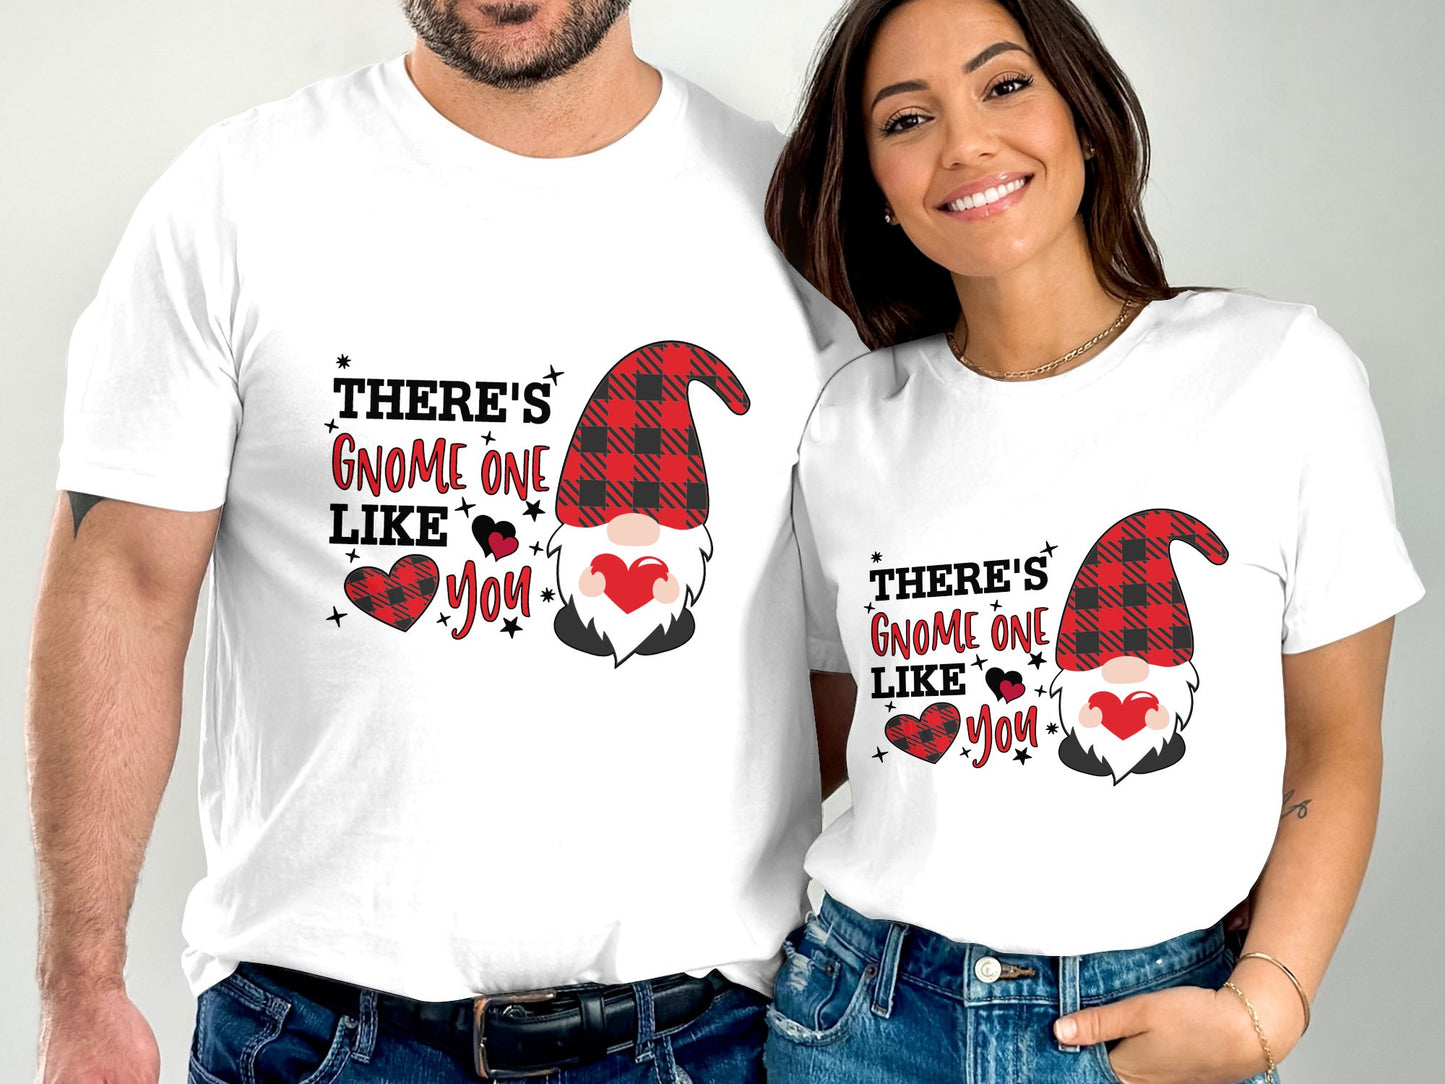 There's Gnome One Like You (Valentine T-shirt)